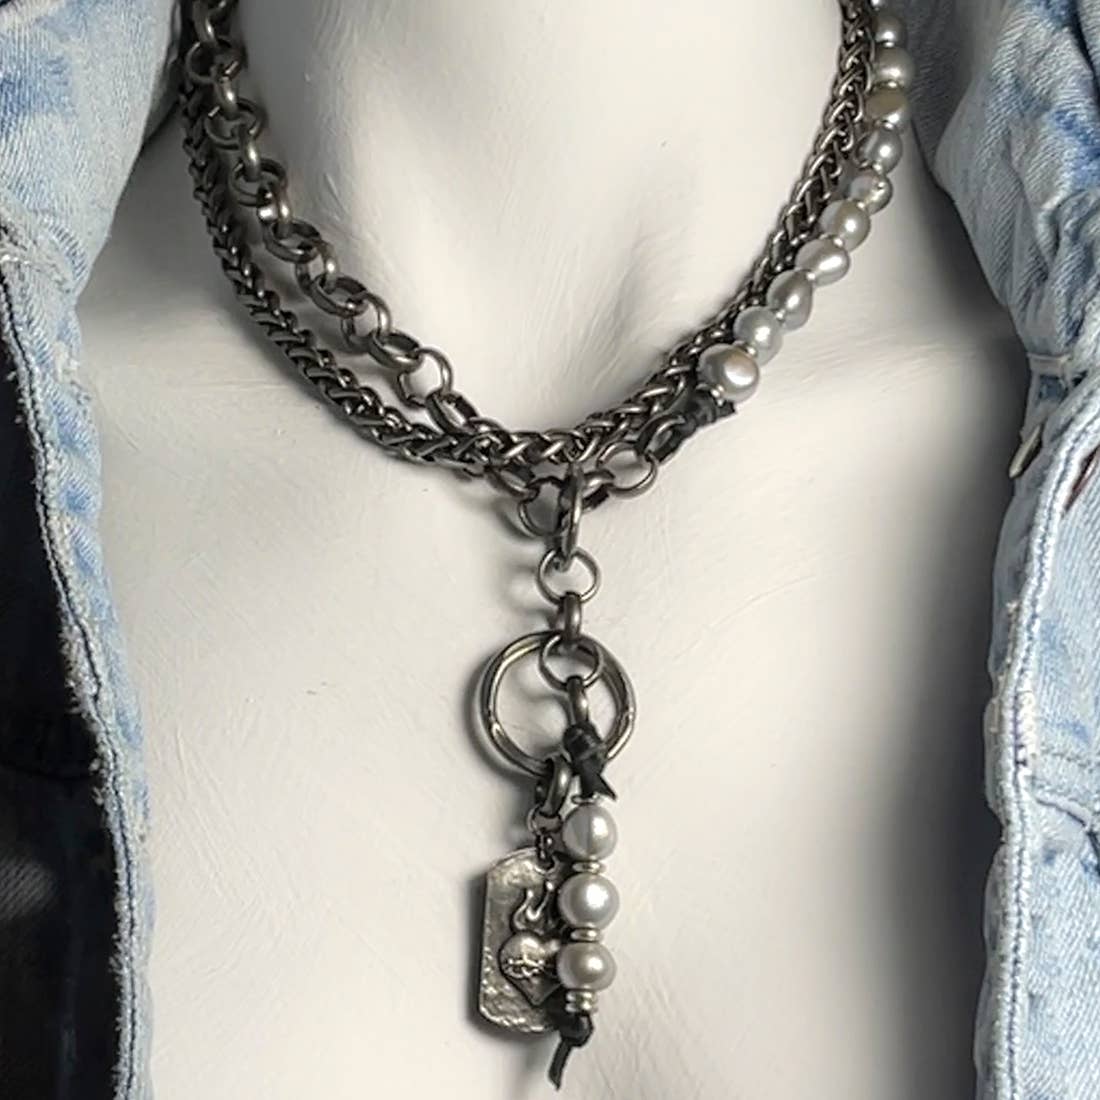 COCO Baroque Pearls Mixed Metals Opera Necklace or Choker - Gunmetal with Pewter Heart Tassel